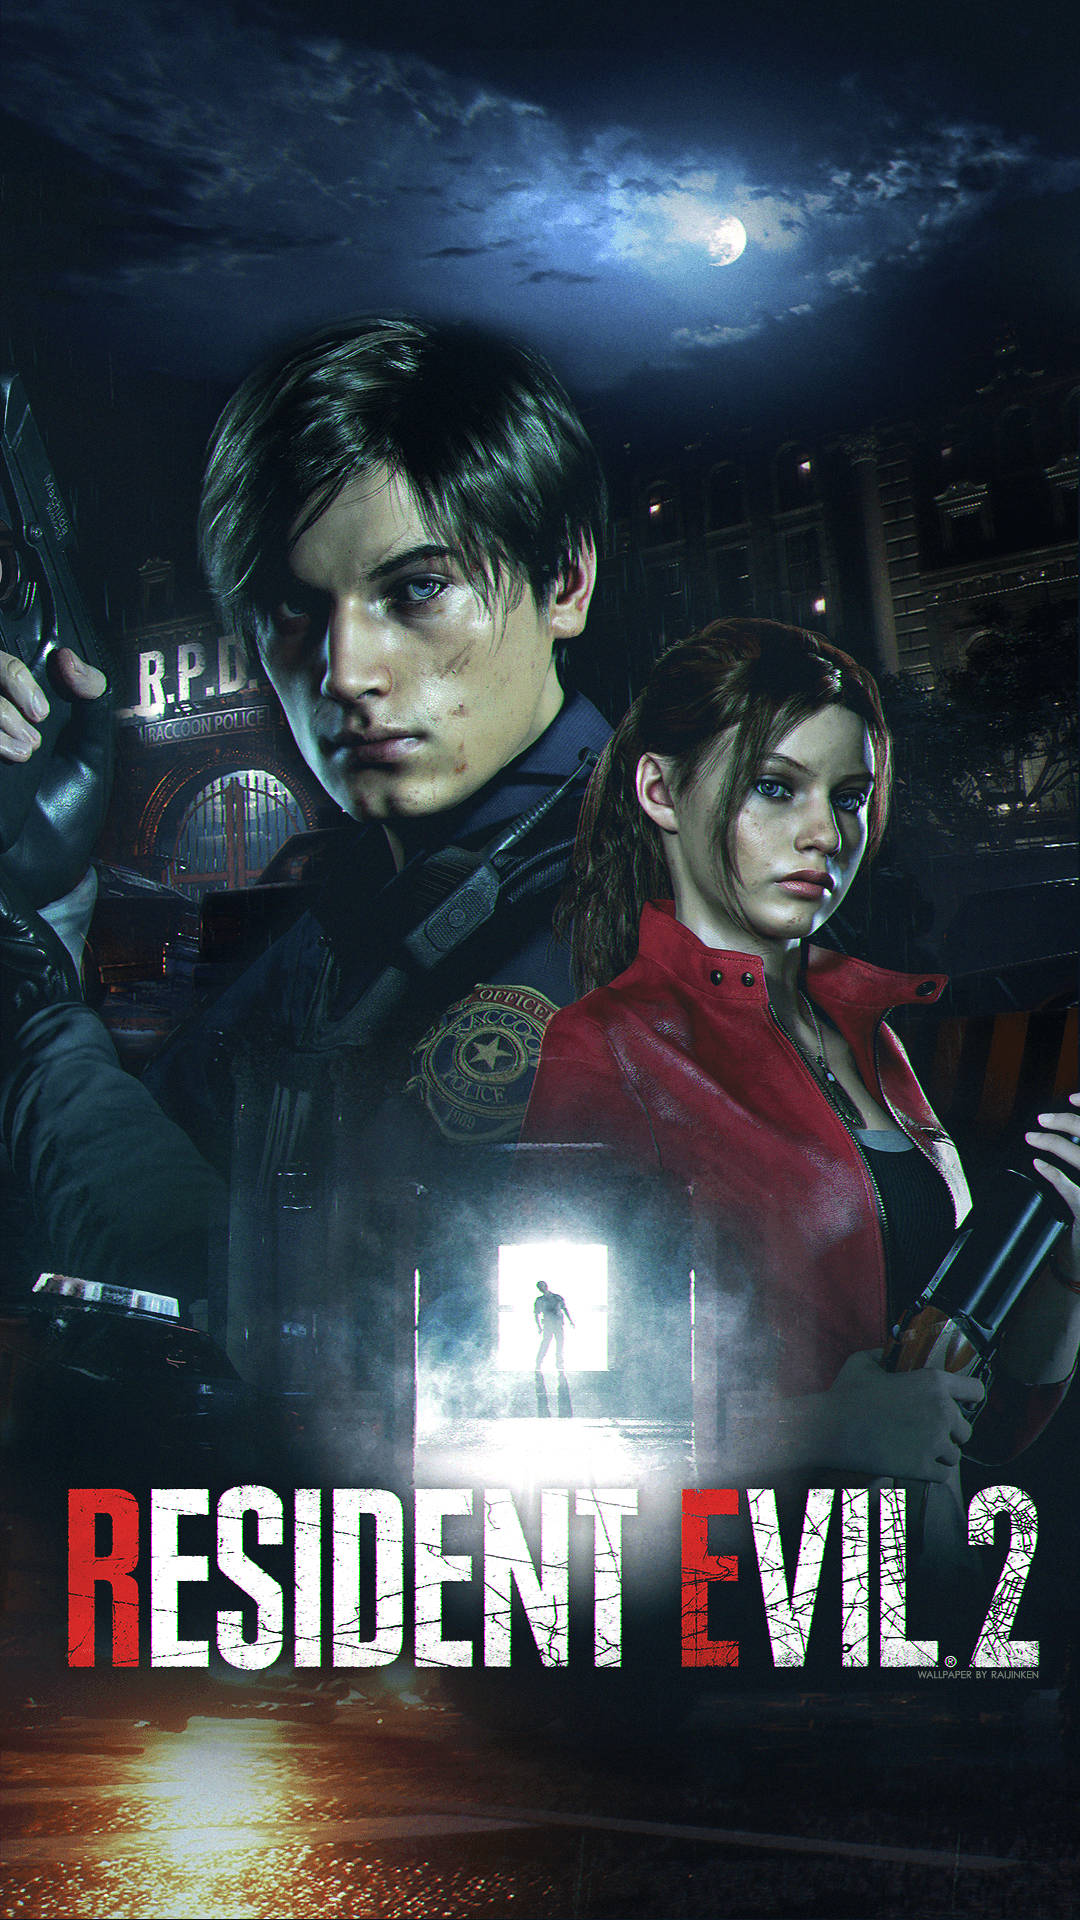 Protect Raccoon City from a zombie apocalypse in Resident Evil 2 Wallpaper